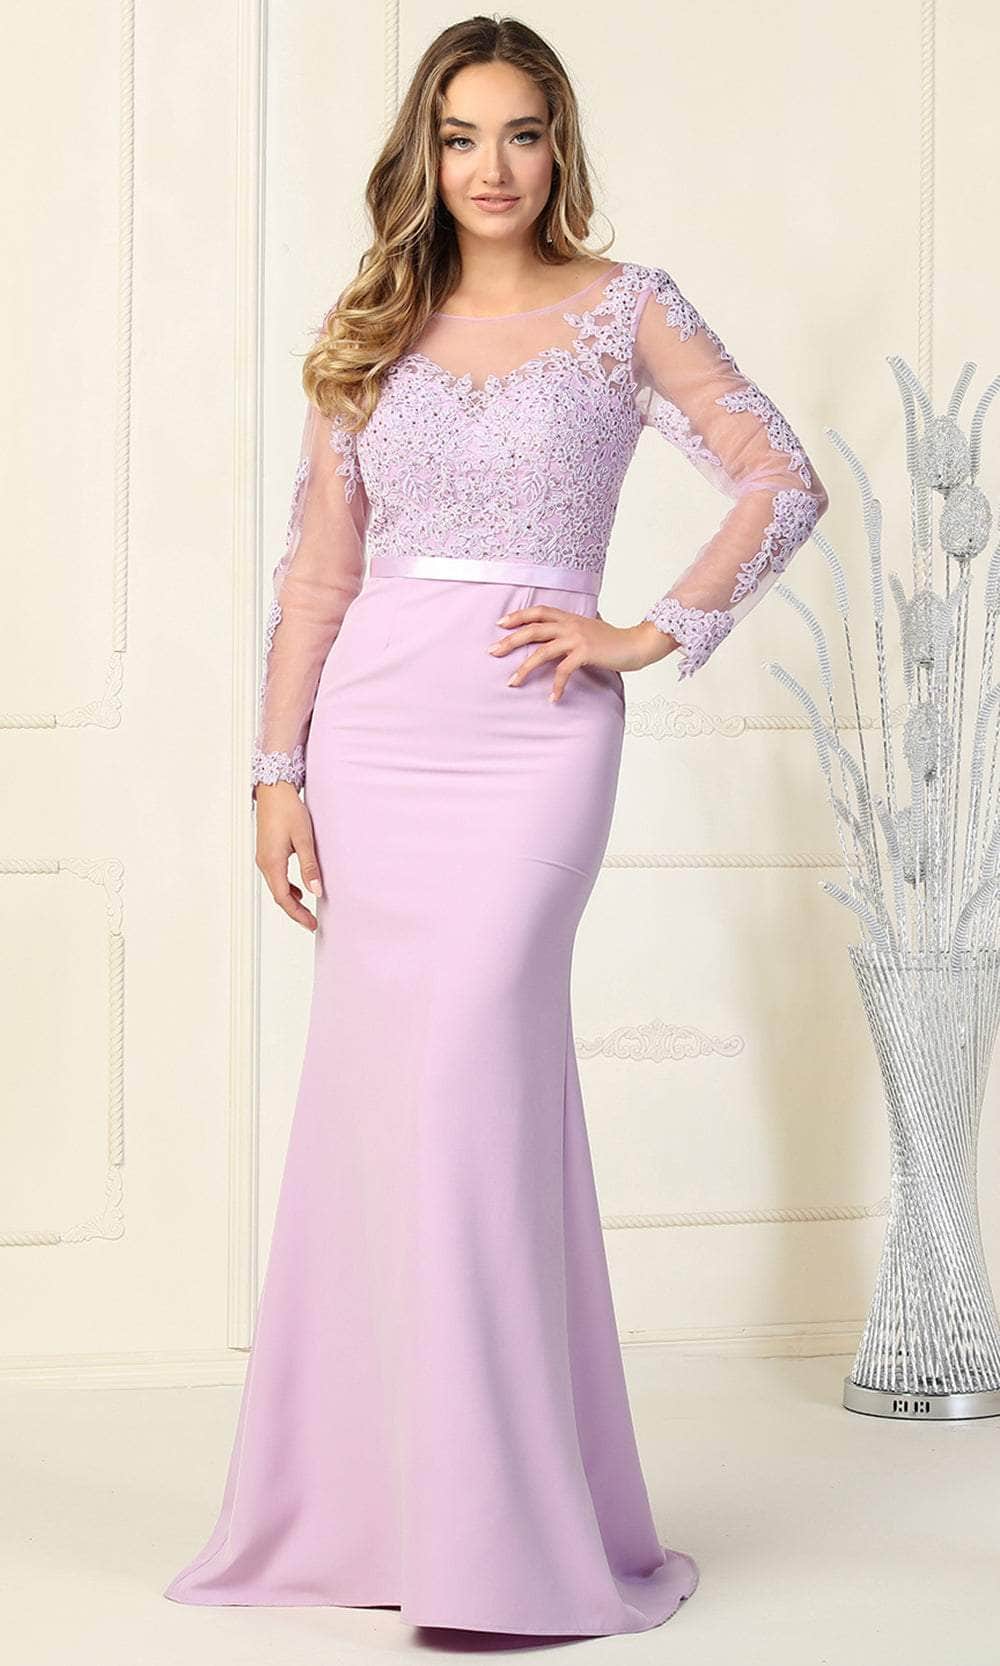 May Queen MQ1847 - Illusion Bateau Formal Gown Special Occasion Dress 4 / Lilac